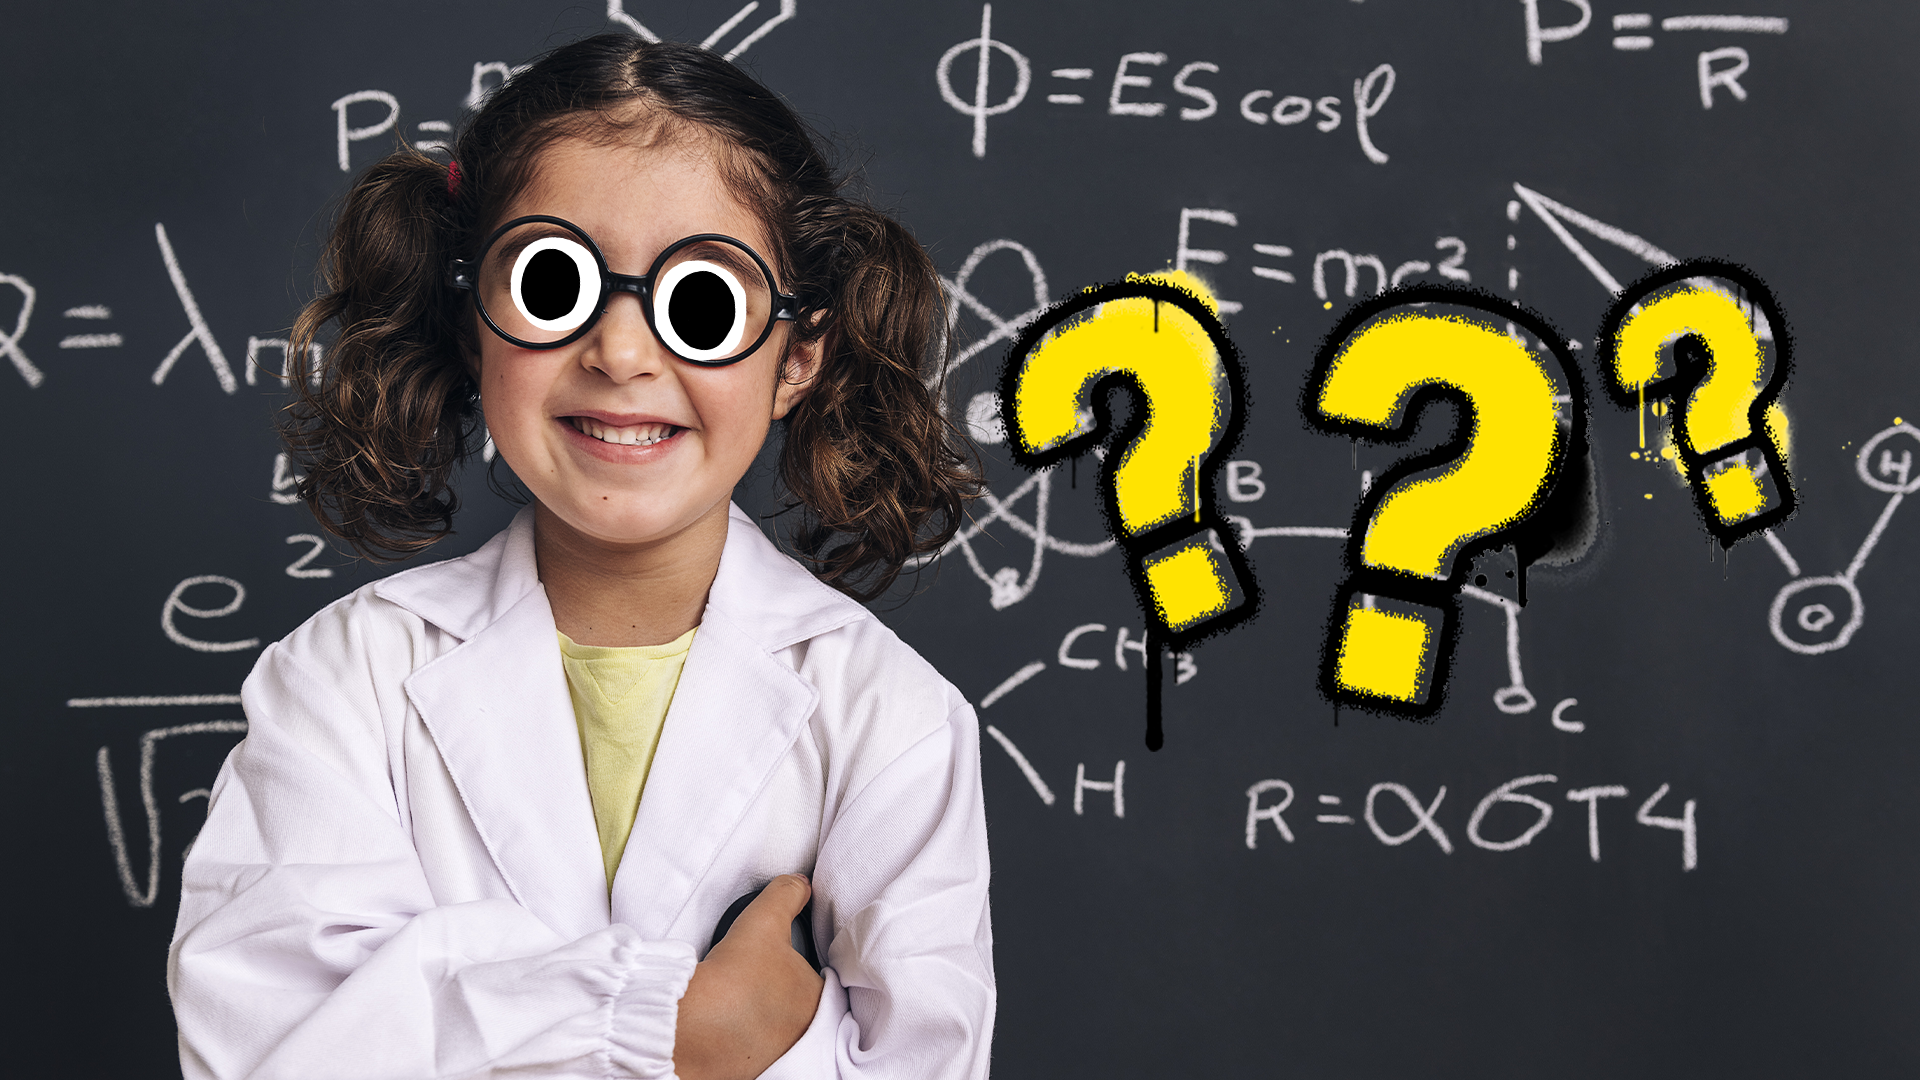 Girl scientist with blackboard and question marks 